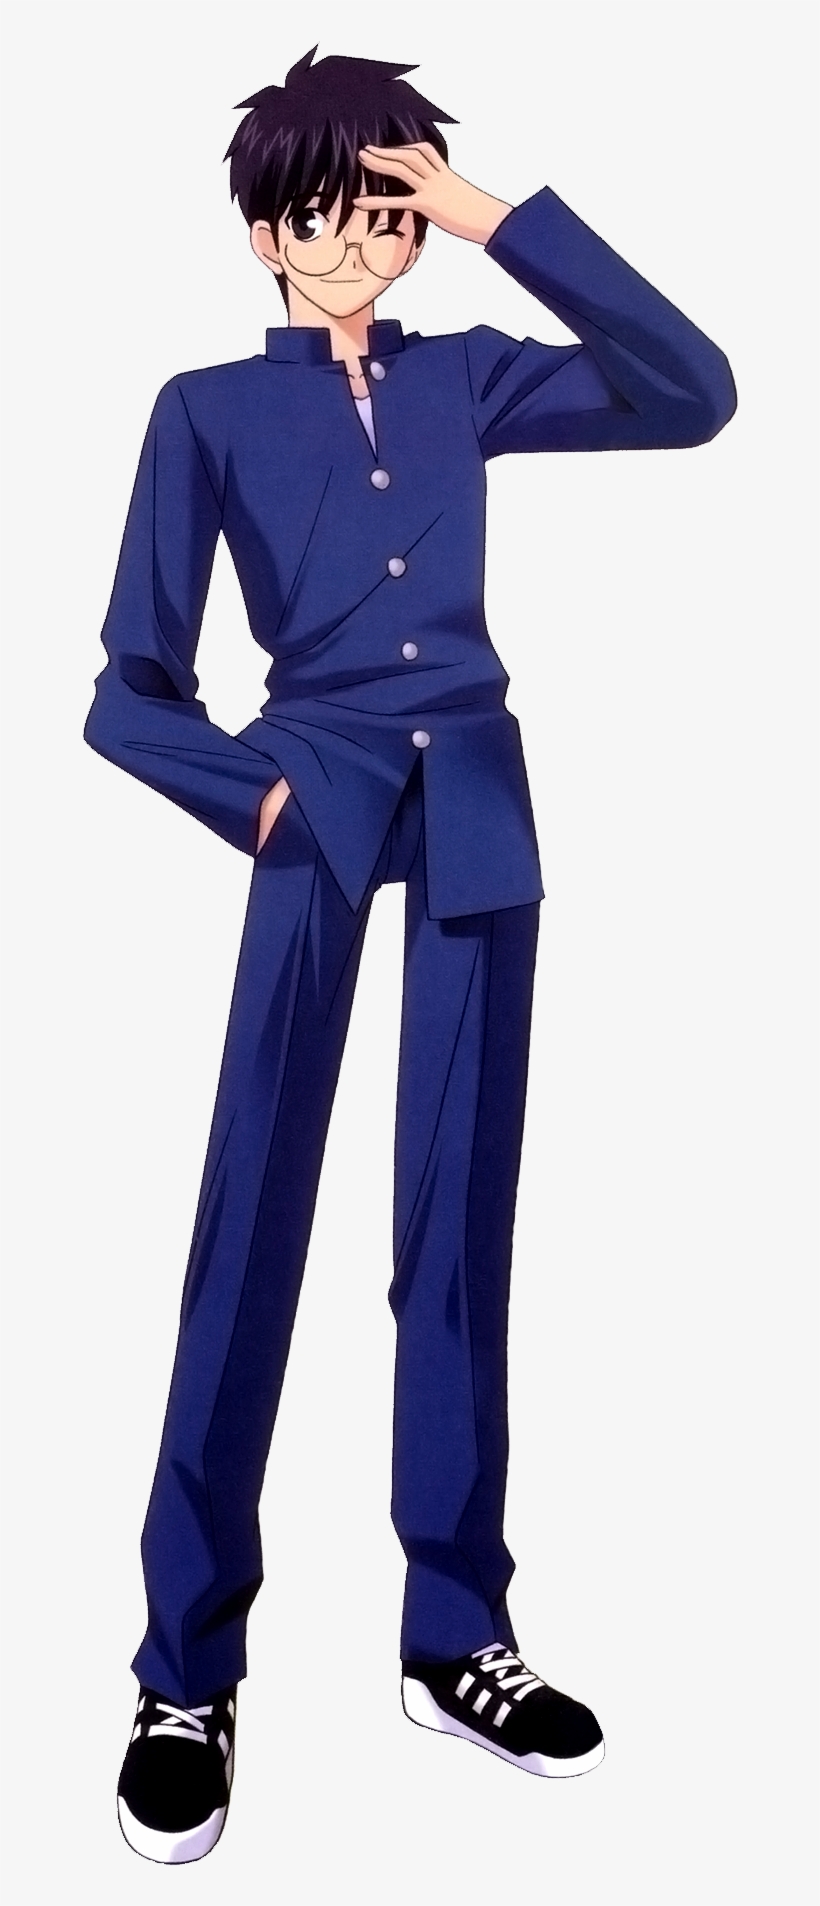 View Image , - Melty Blood Shiki Tohno, transparent png #5991765